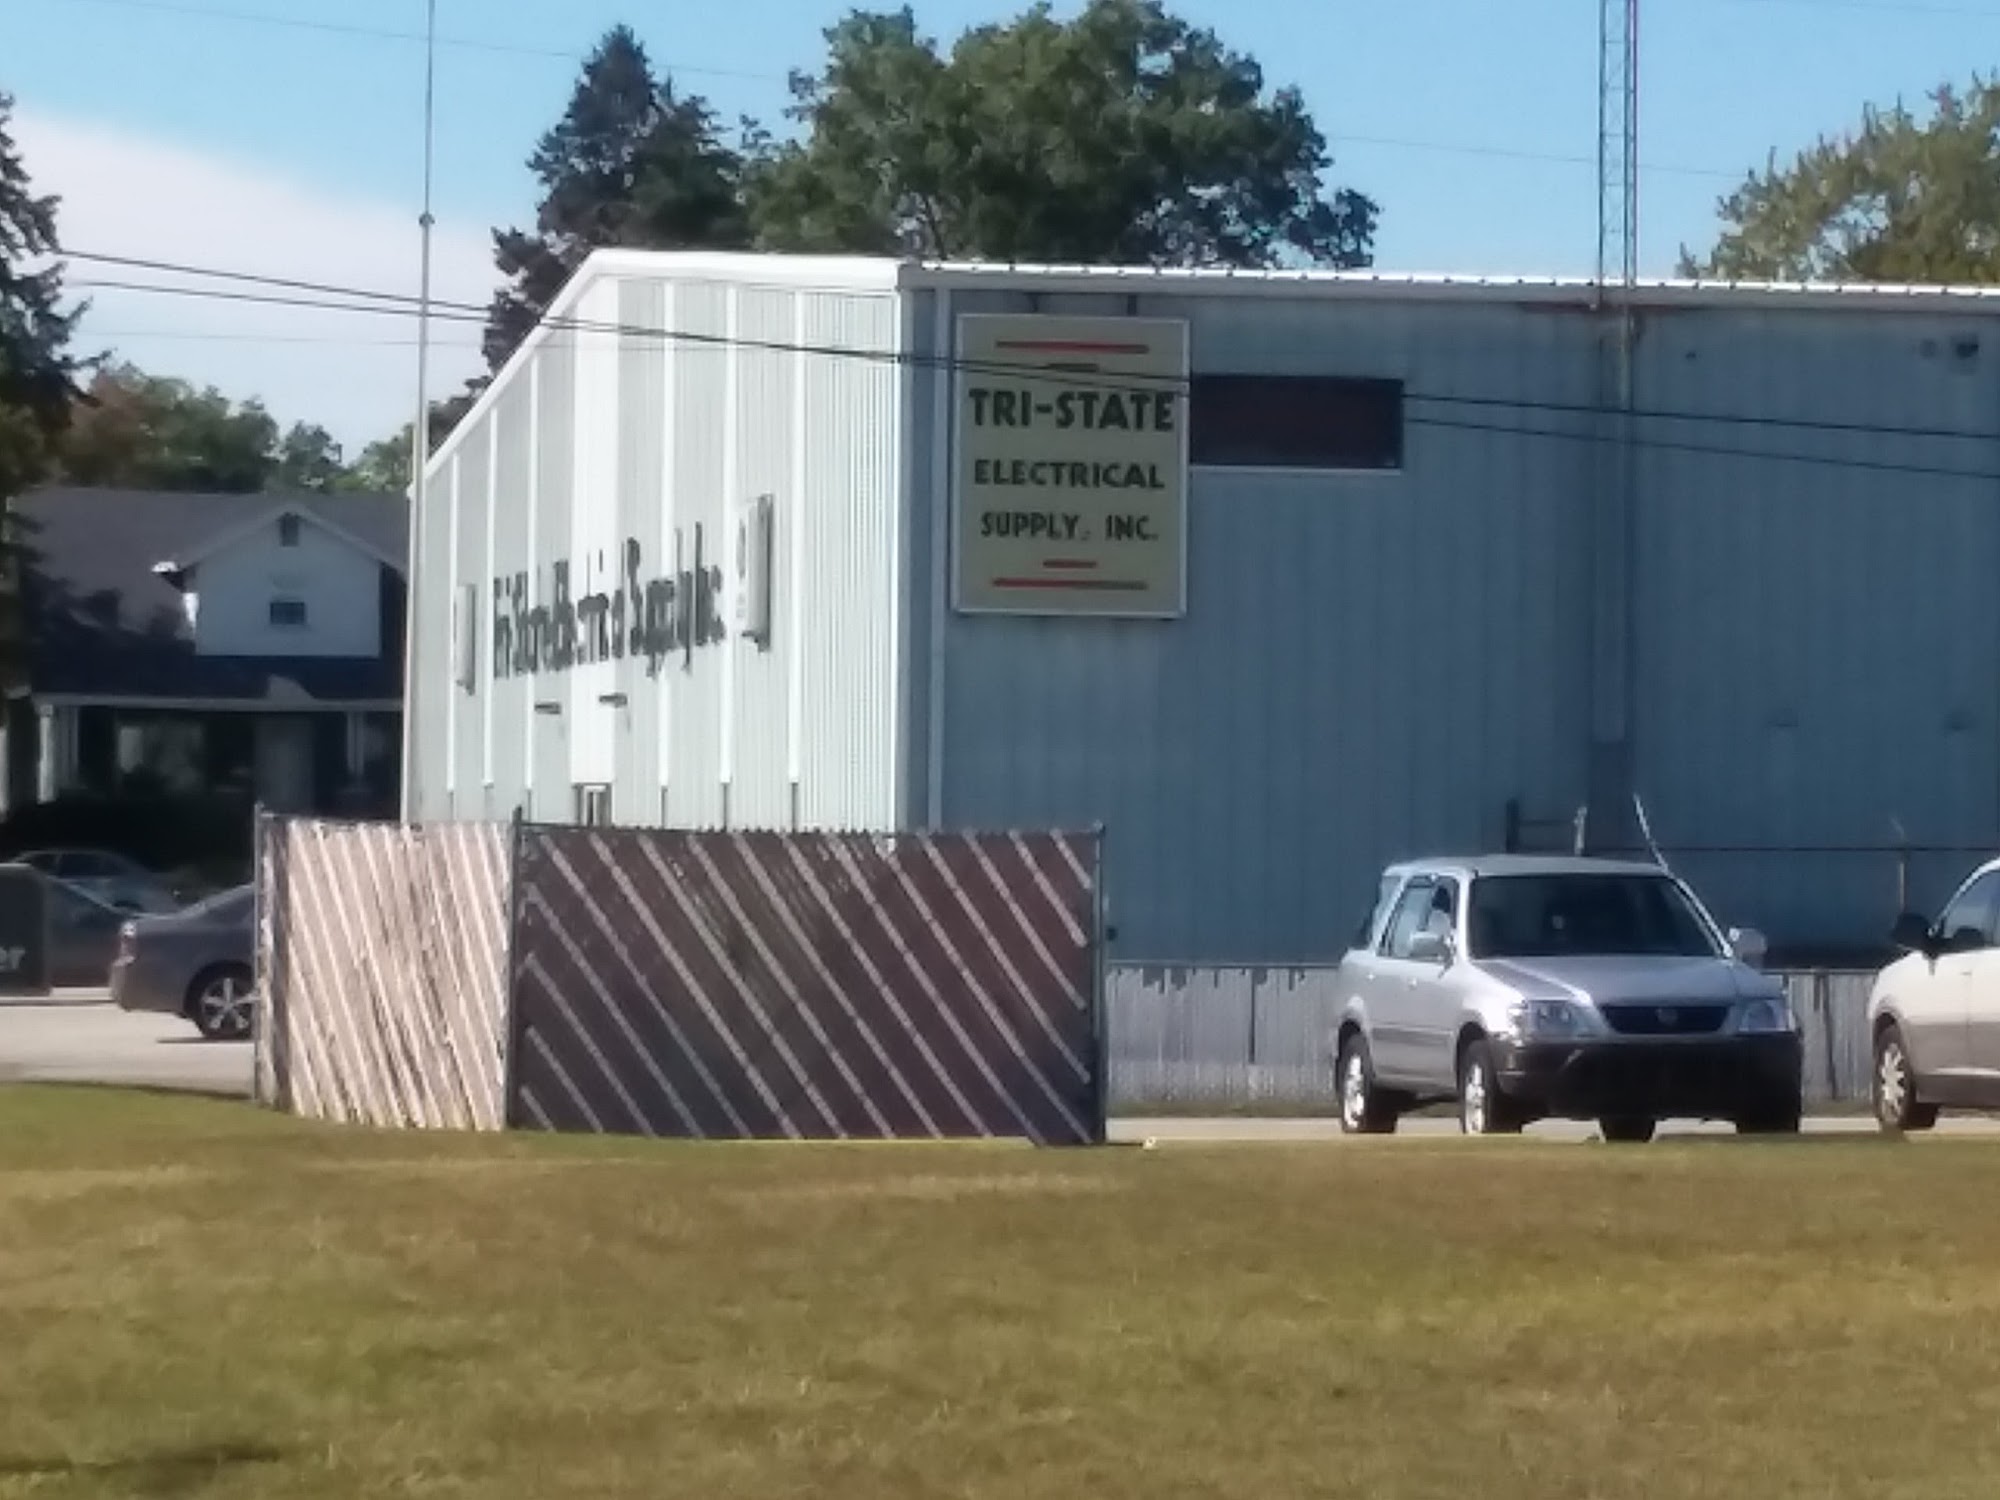 Tri-State Electrical Supply